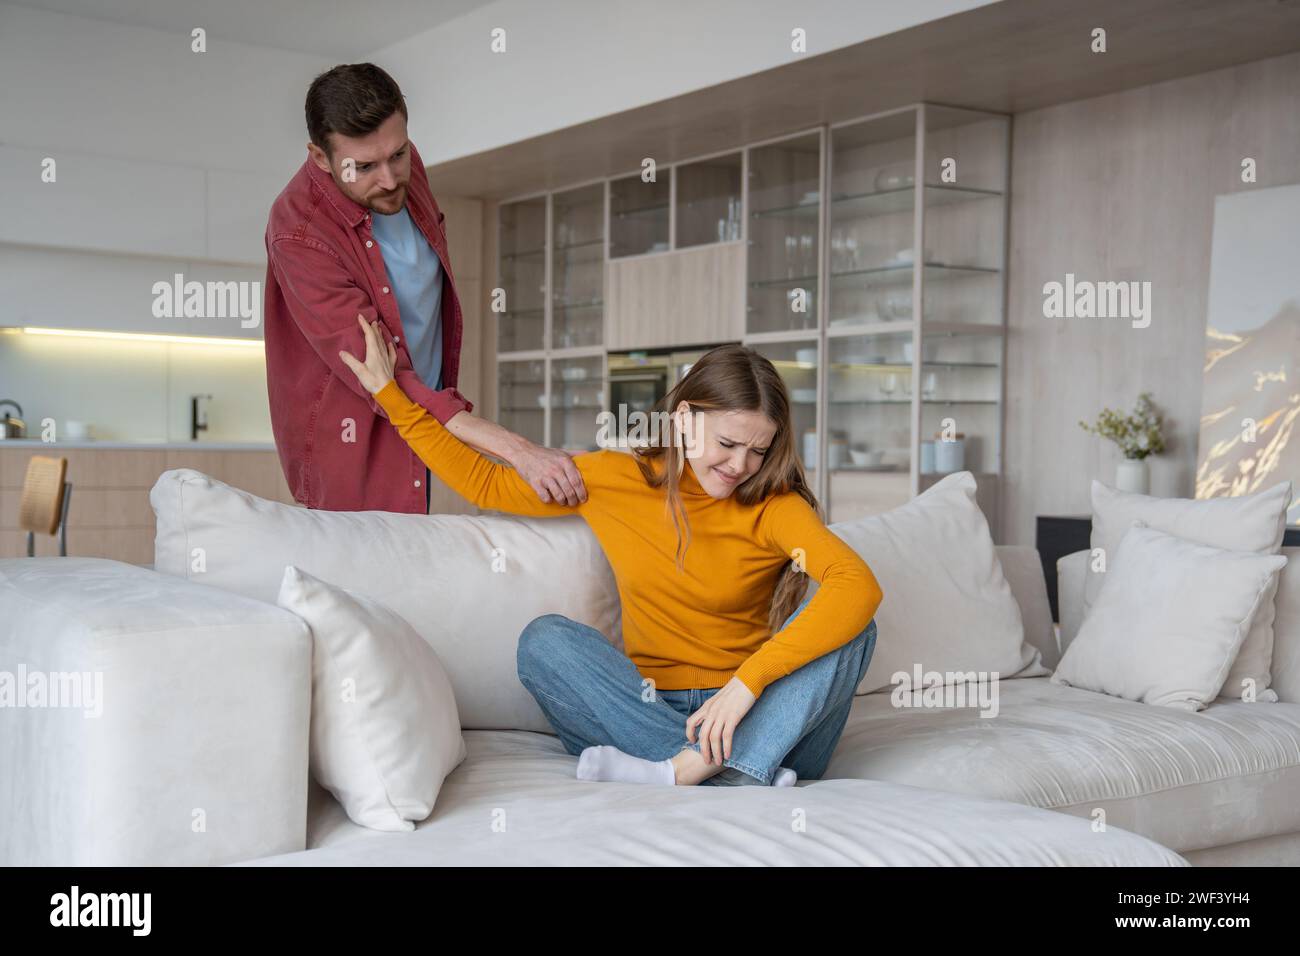 Jealous angry husband rudely touching wife hand. Crying wife suffering from domestic violence Stock Photo